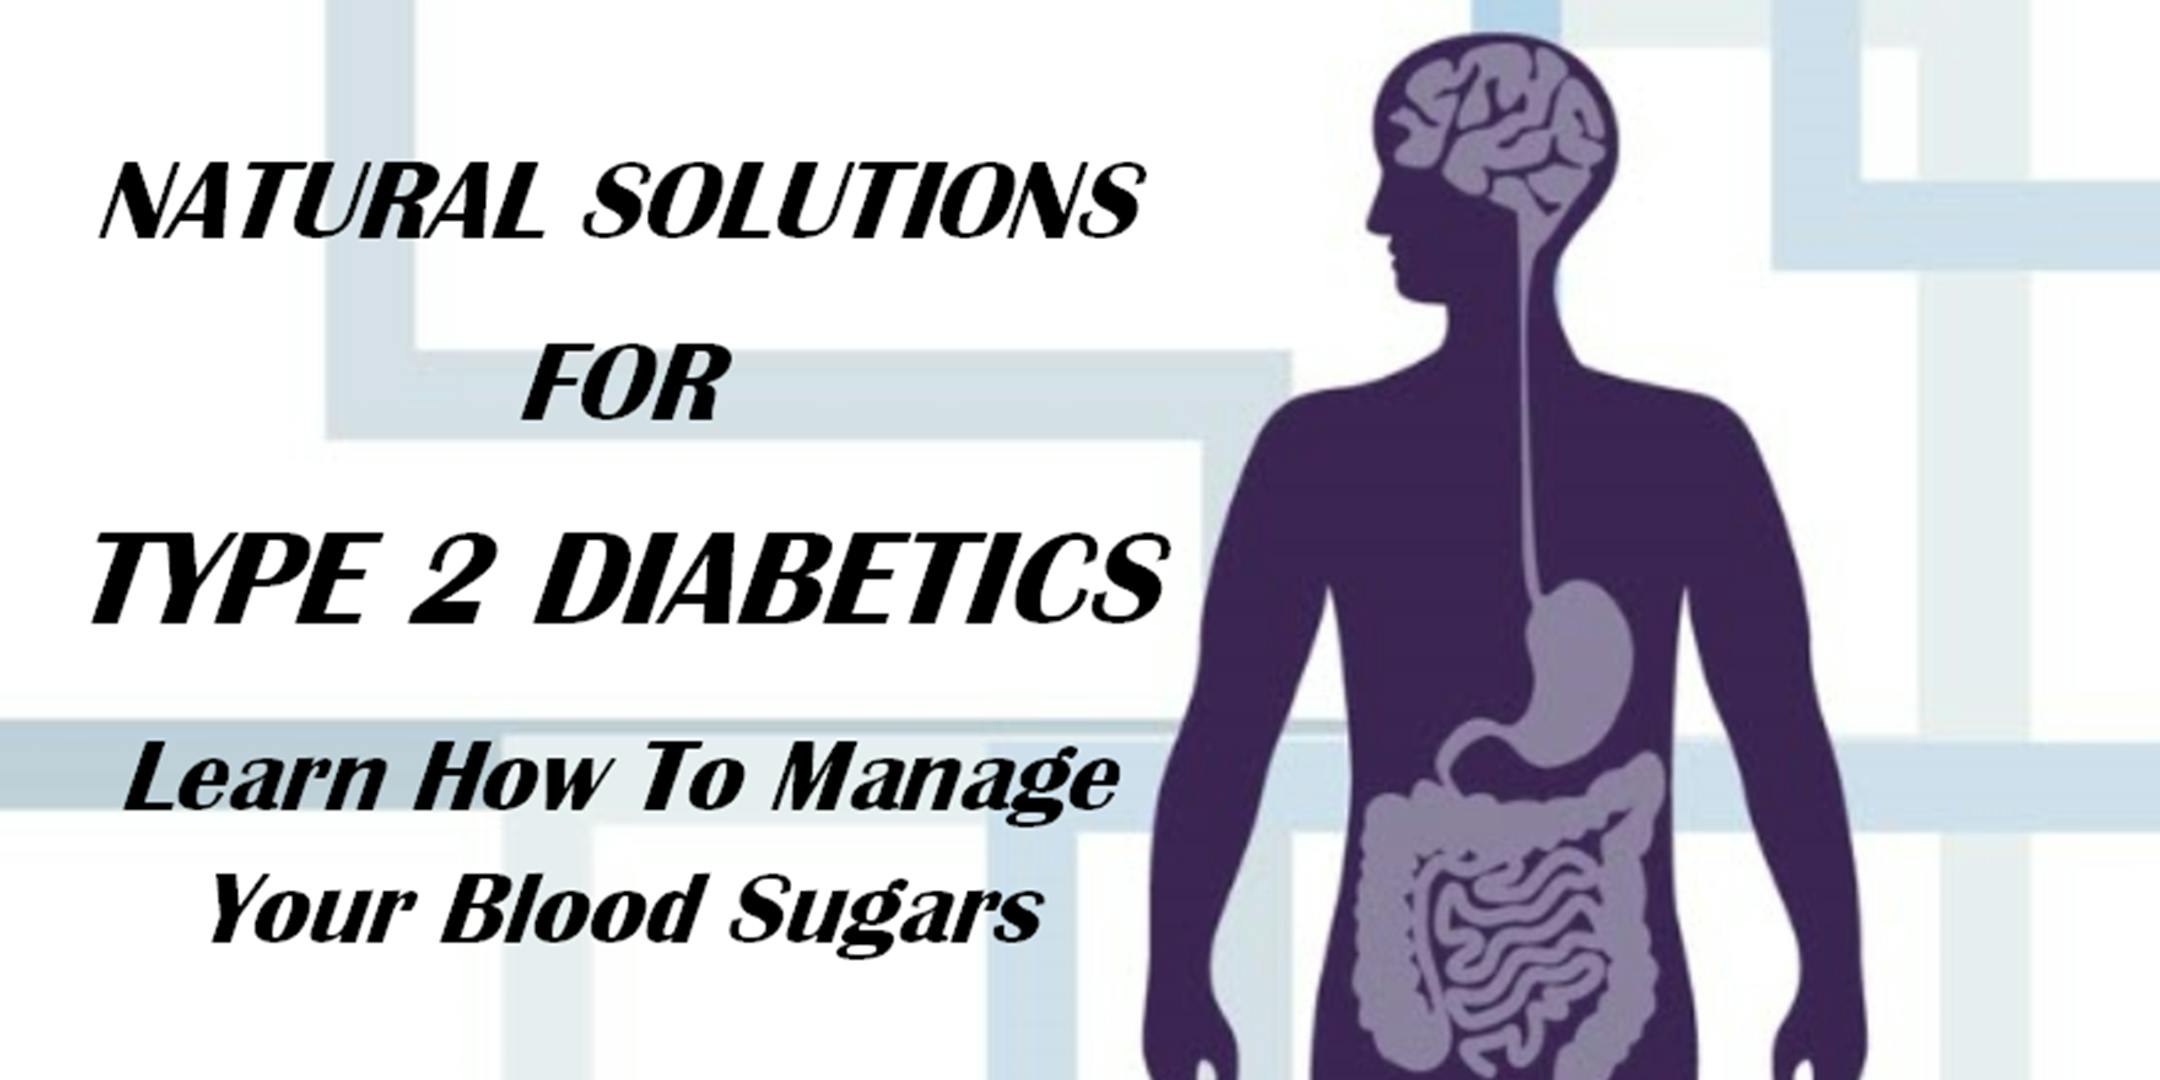 SC01 / Natural Solutions for Type 2 Diabetics / Learn How To Manage Your Blood Sugars / Charleston, SC